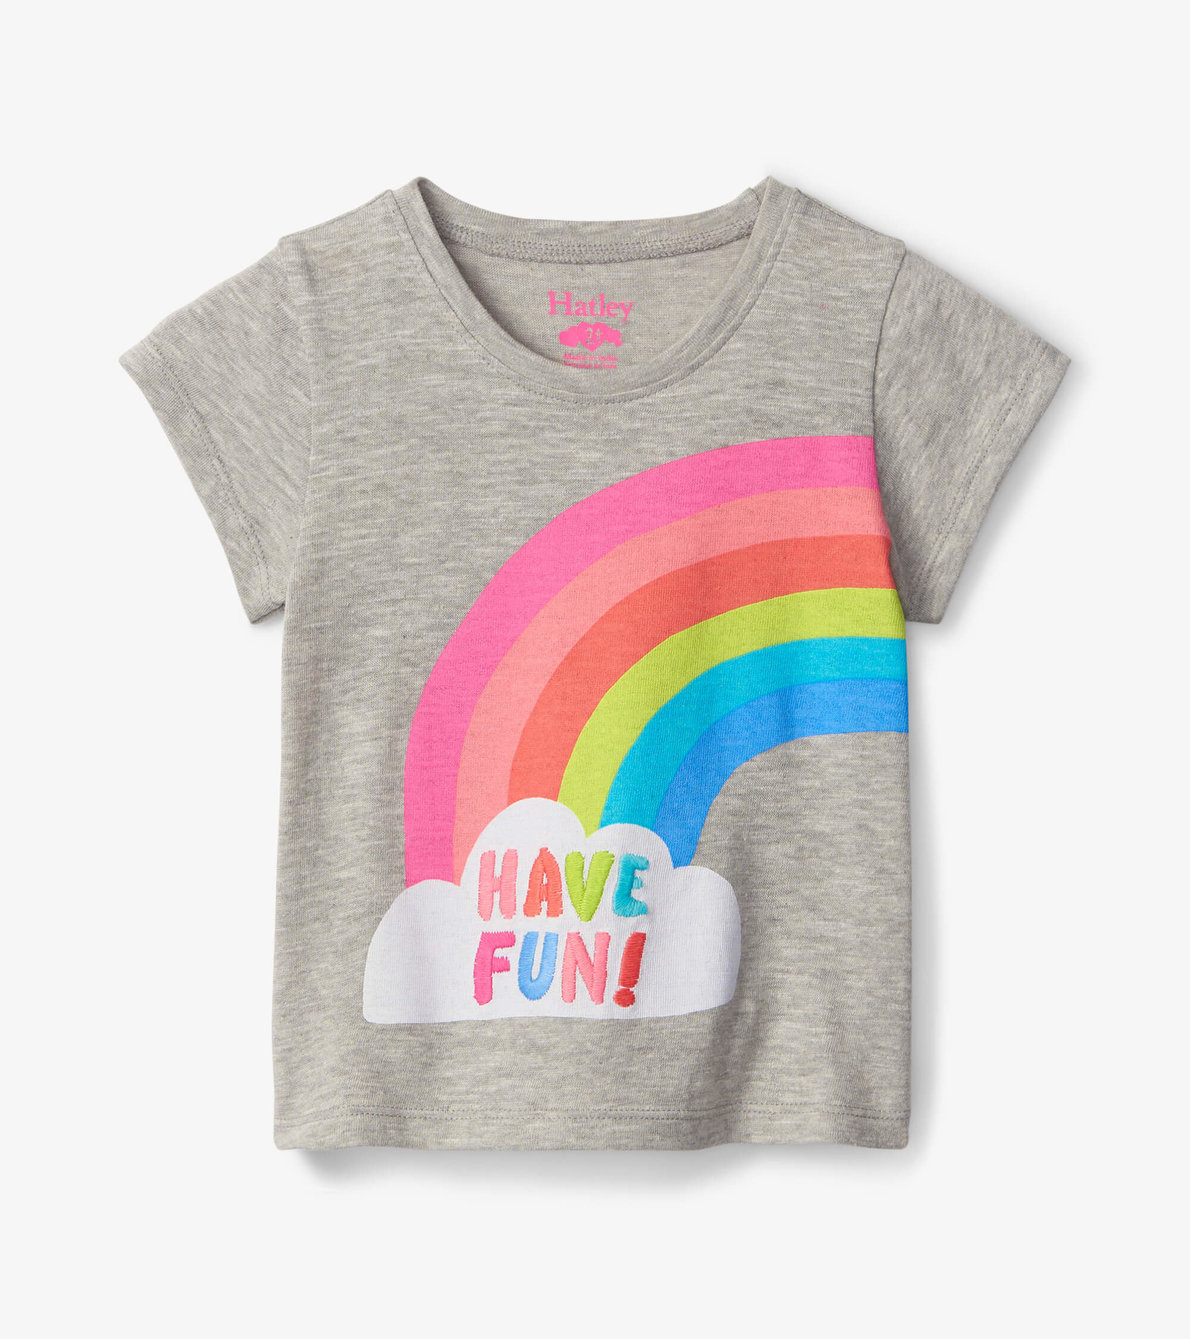 View larger image of Have Fun! Toddler Graphic Tee